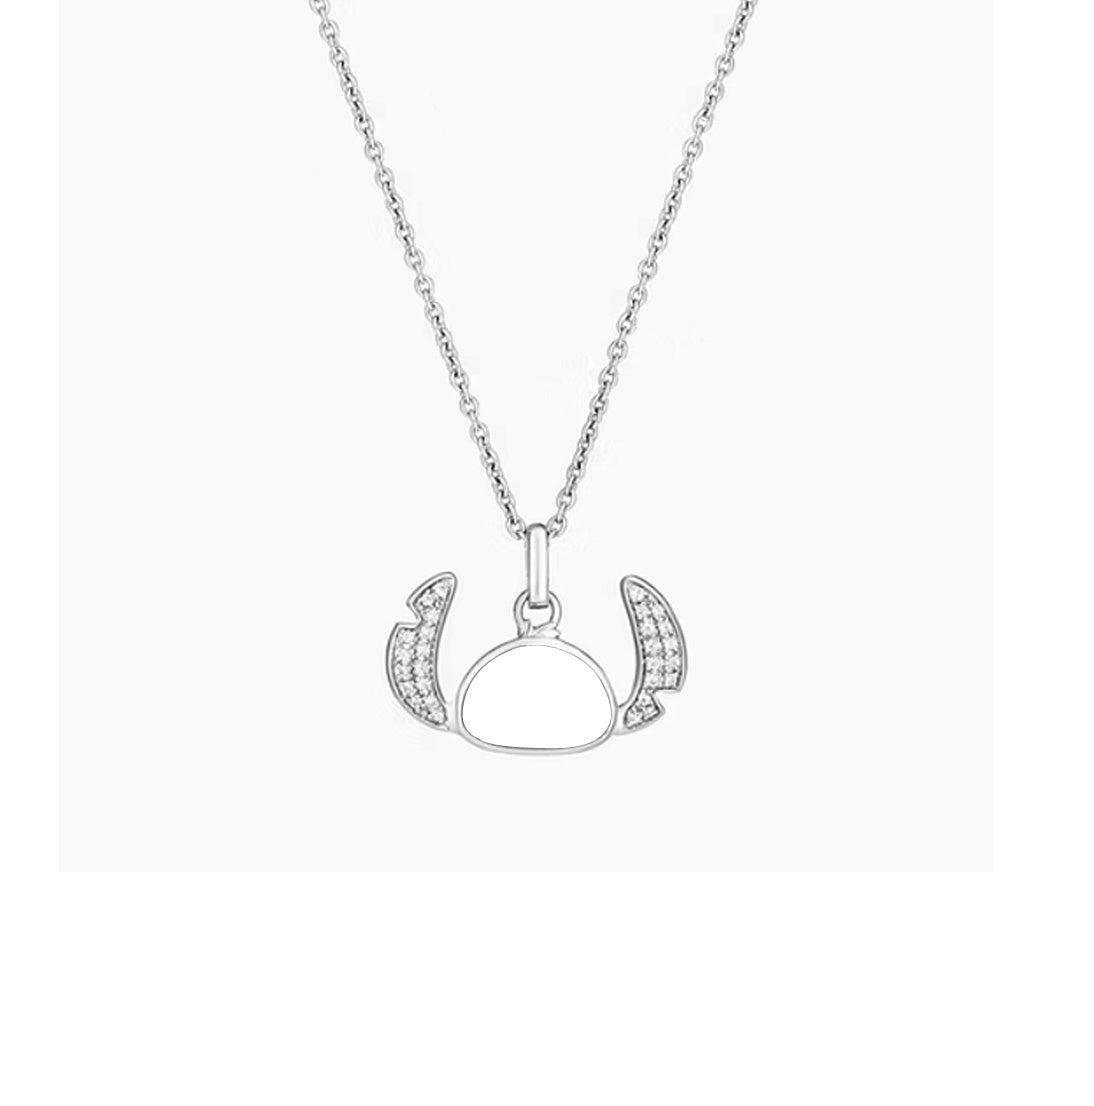 Cute Little Monster Pendant Necklace 18" 925 Sterling Silver